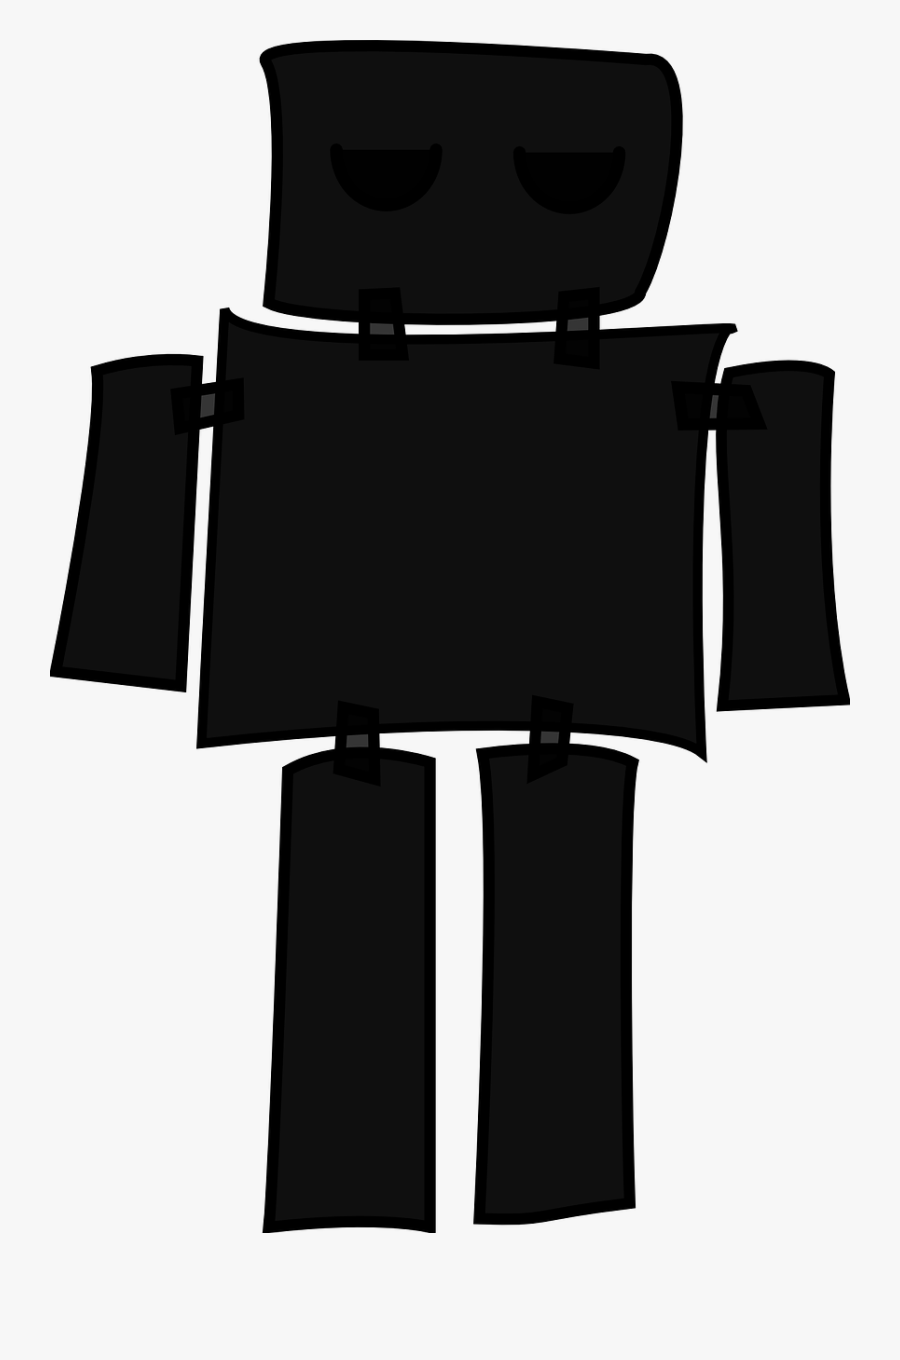 Robot Android Droid Free Picture - Blue Robot Cartoon Png, Transparent Clipart